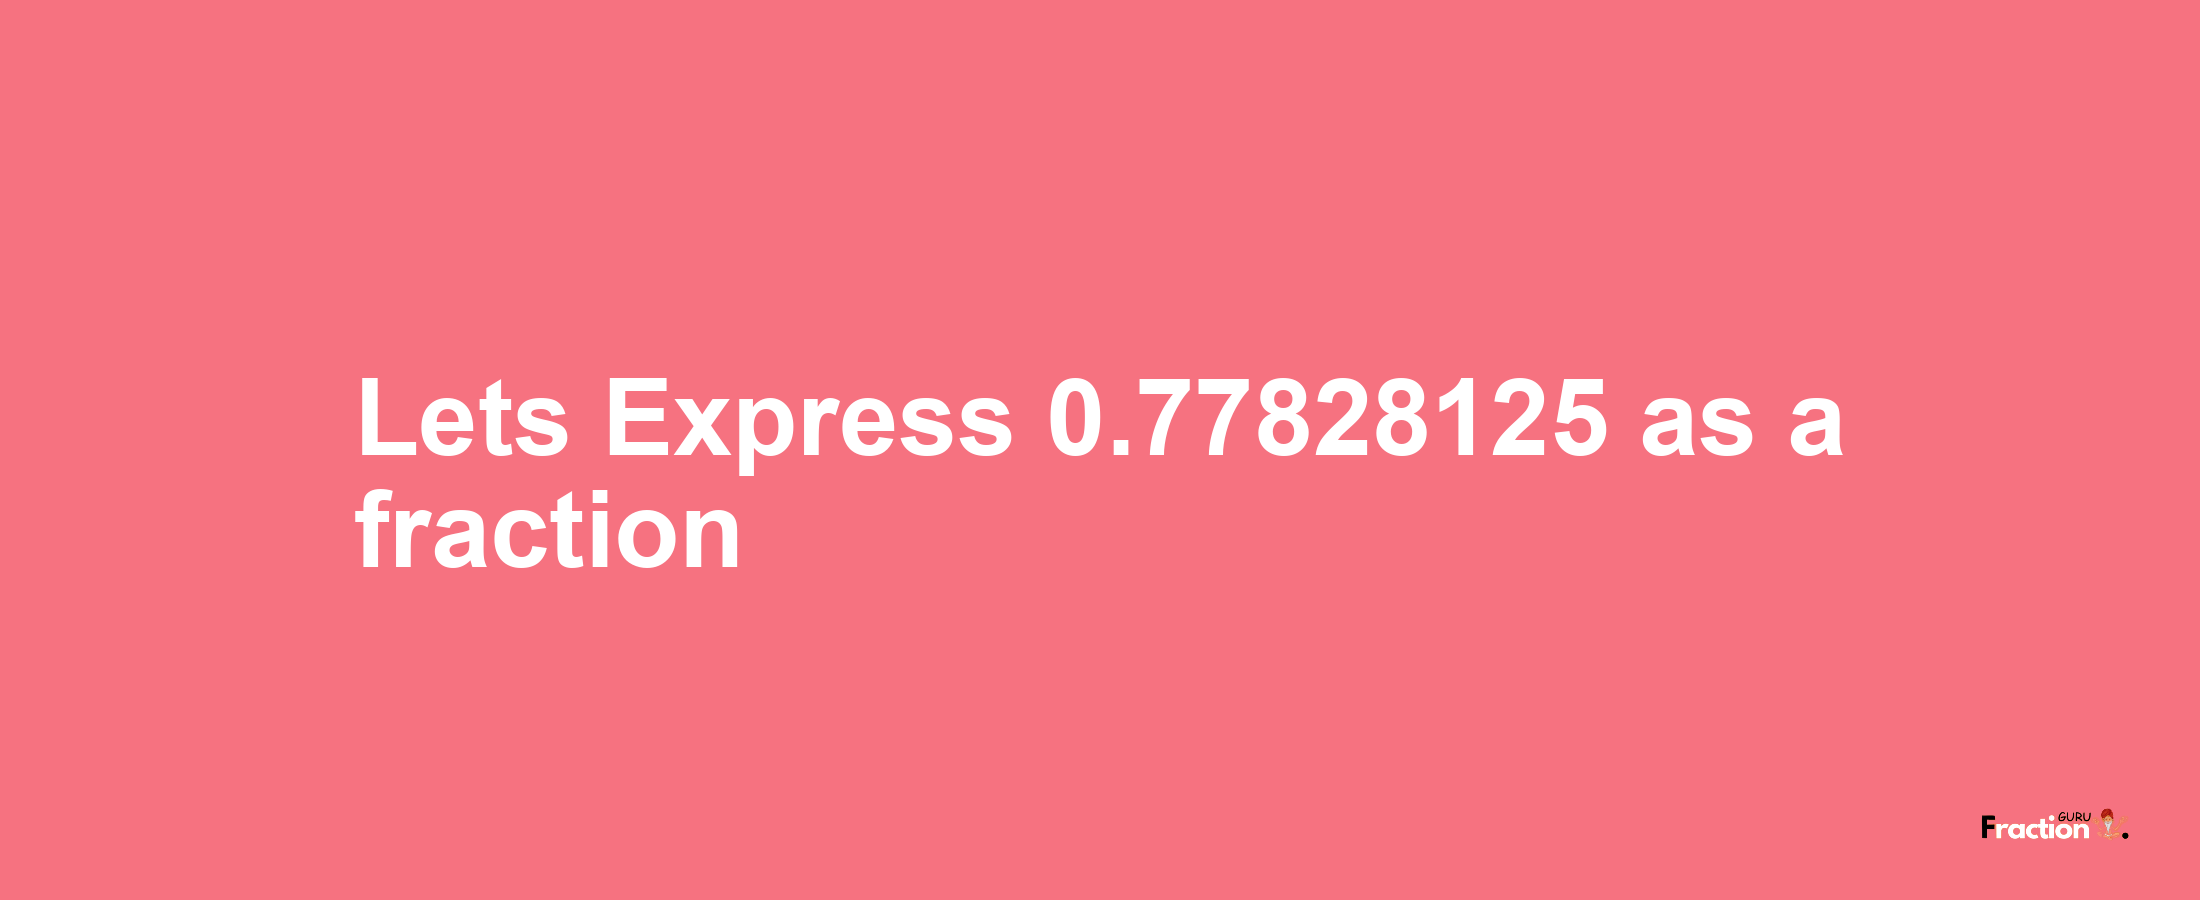 Lets Express 0.77828125 as afraction